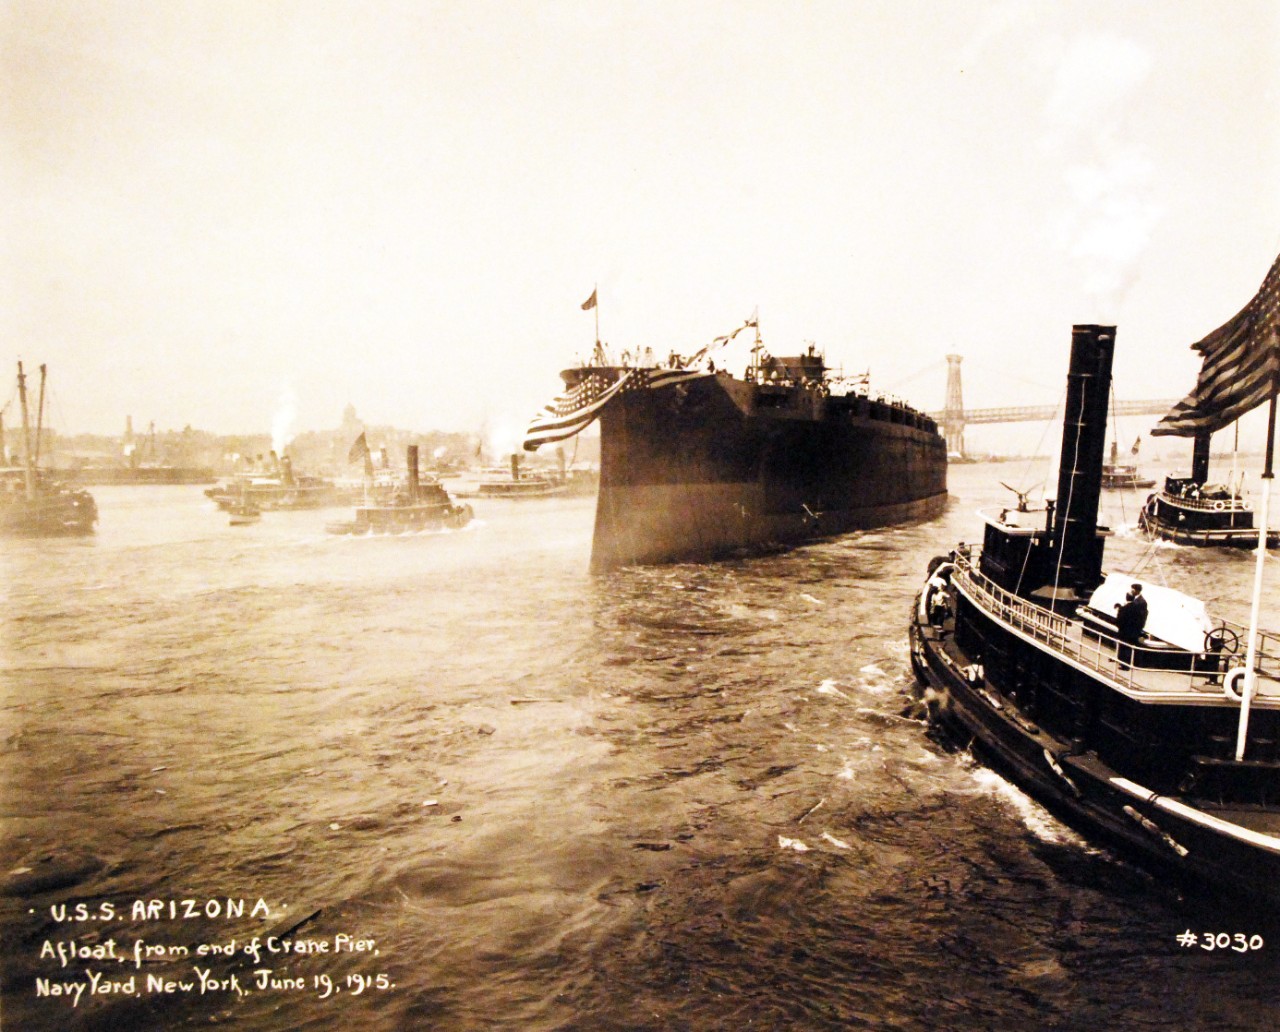 <p>19-LC-19A-2:&nbsp; USS&nbsp;<i>Arizona</i>&nbsp;(BB 39) afloat from end of crane pier after being launched at New York Navy Yard, New York, June 19, 1915.&nbsp;&nbsp;</p>
